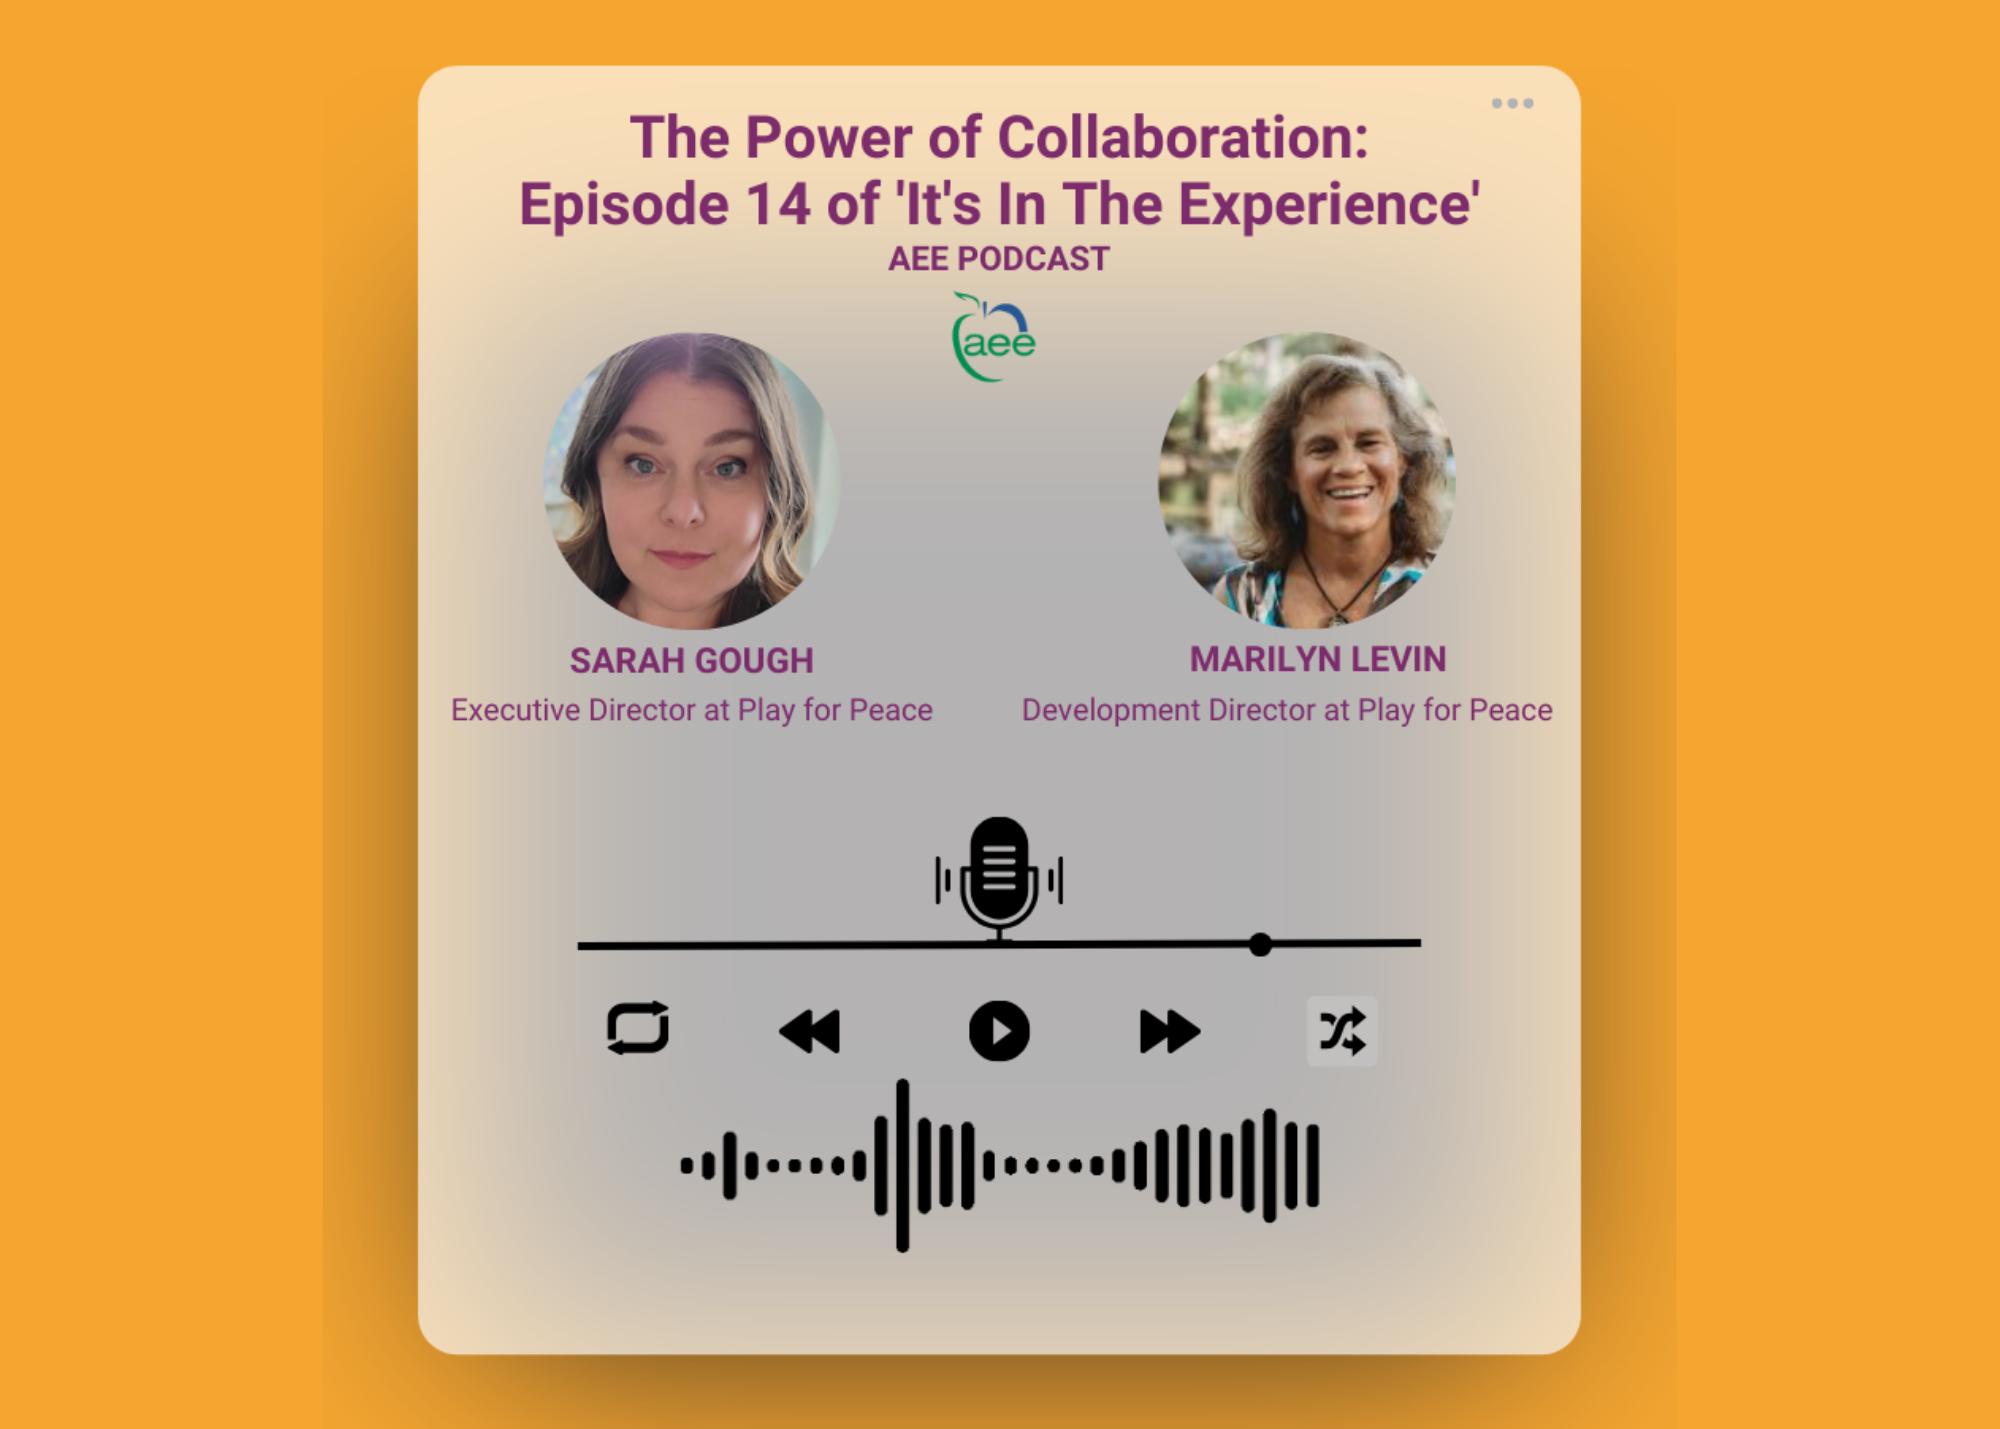 The Power of Collaboration: Insights from Episode 14 of 'It's In The Experience' Podcast